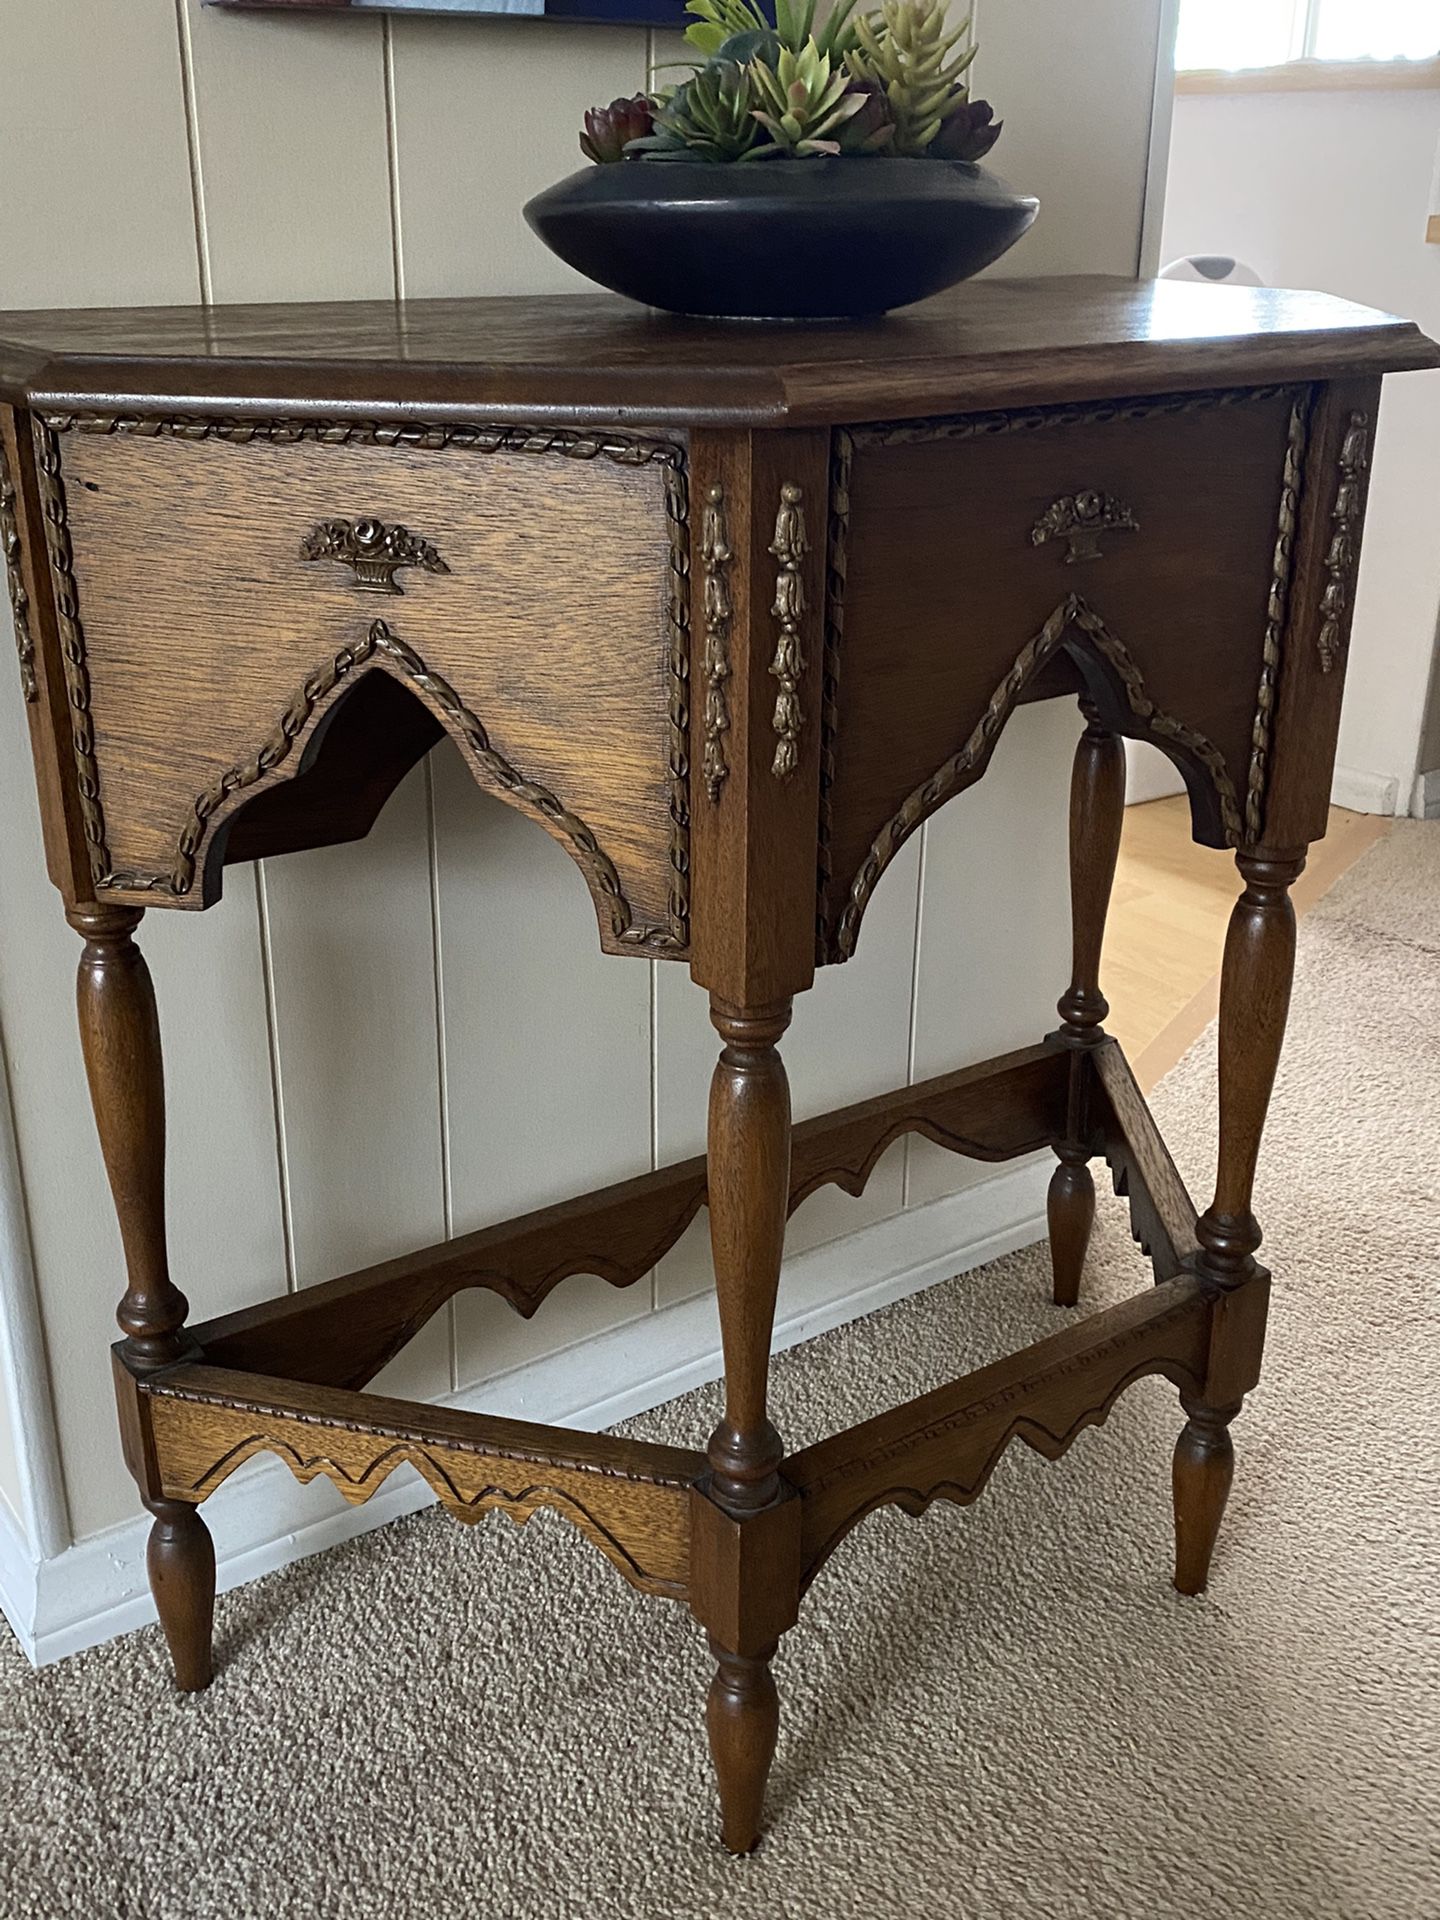 Beautiful Antique Side Table